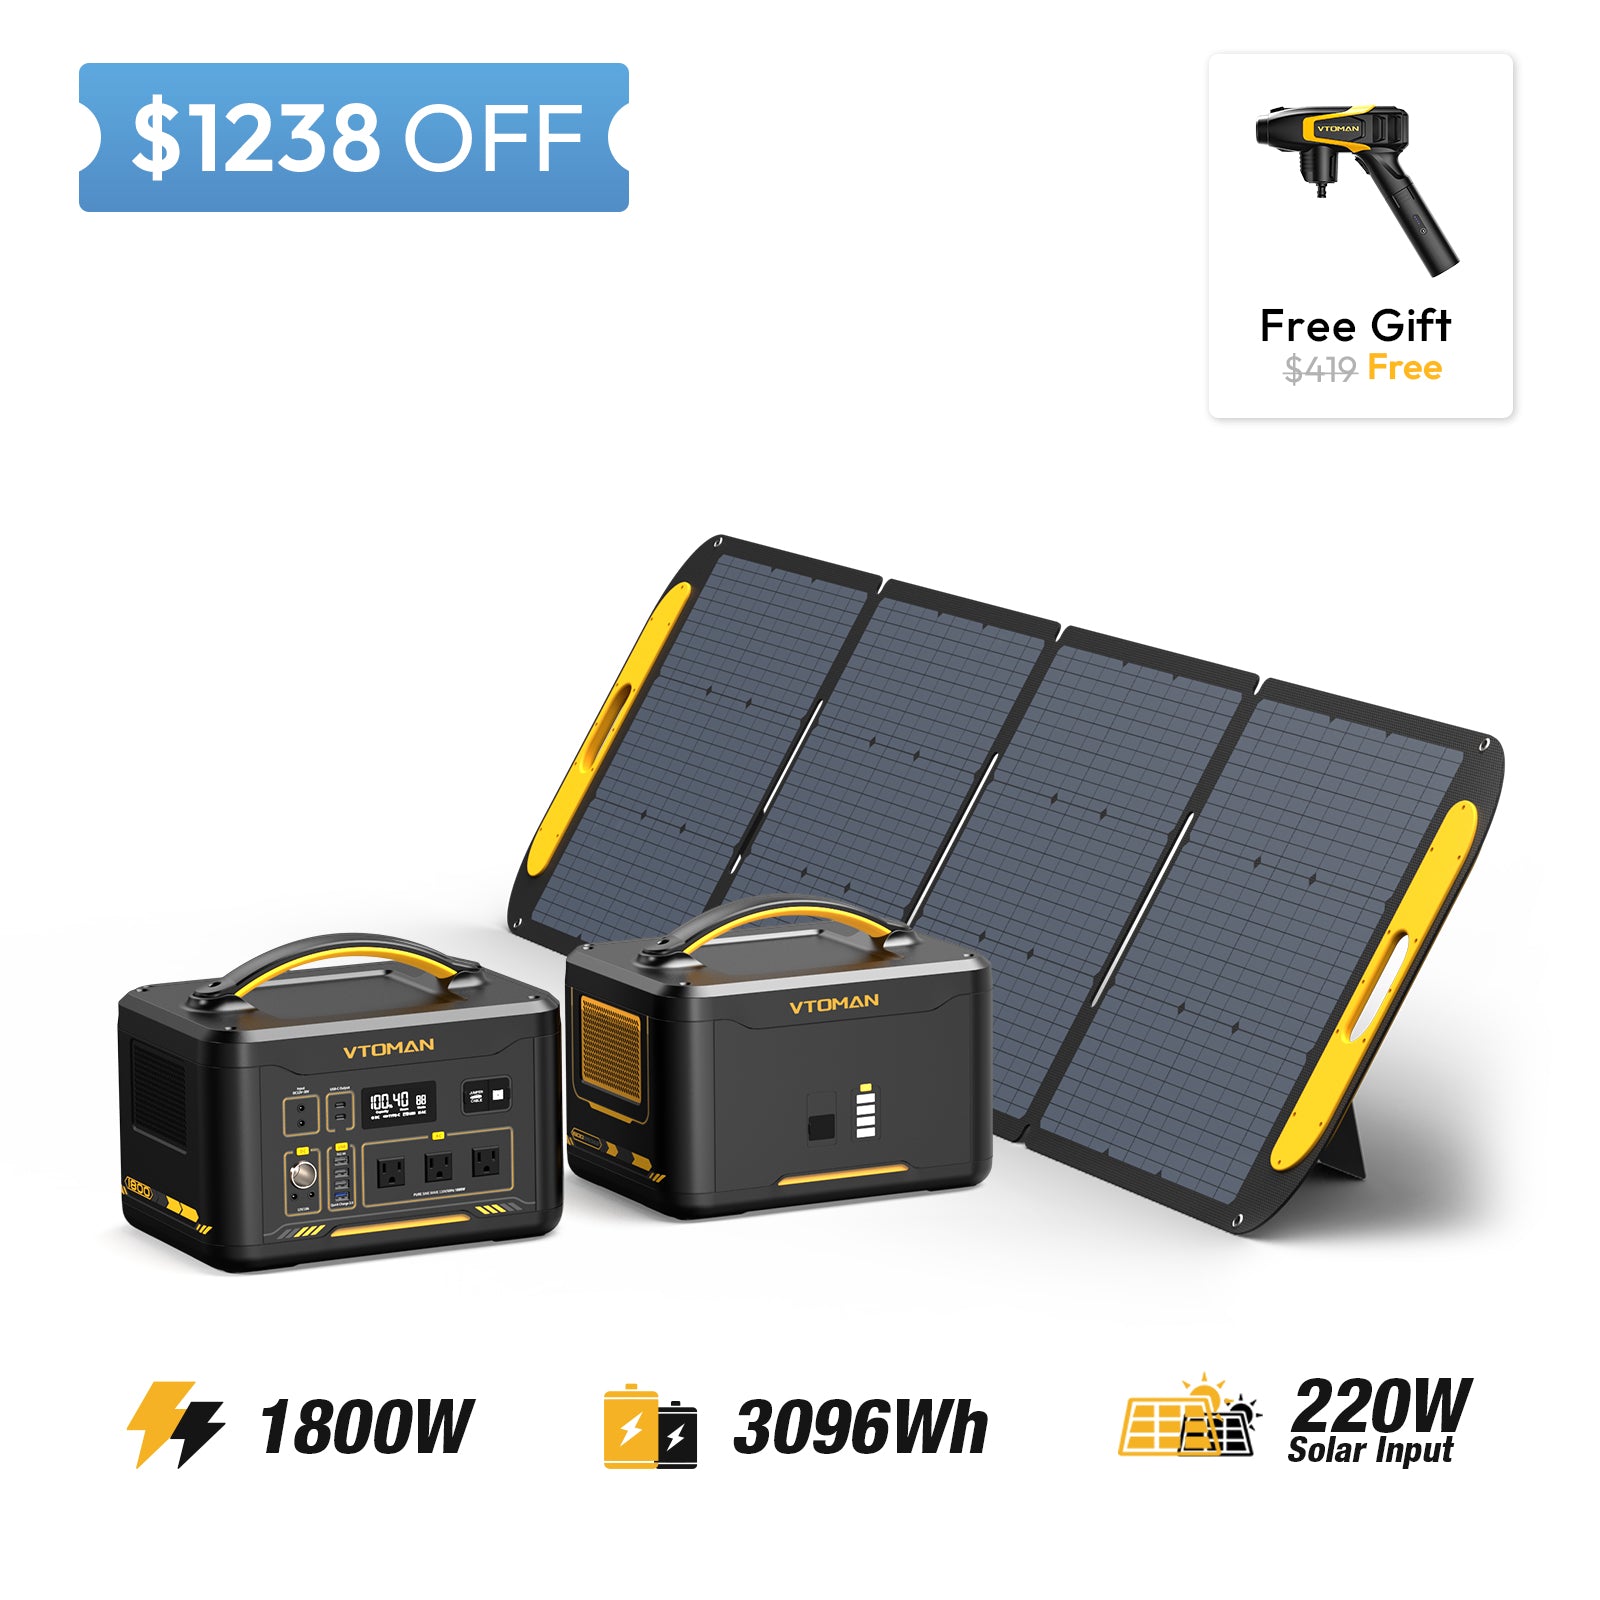 Jump 1800 and 1548wh extra battery and 220w solar panel save $1238 in summer sale